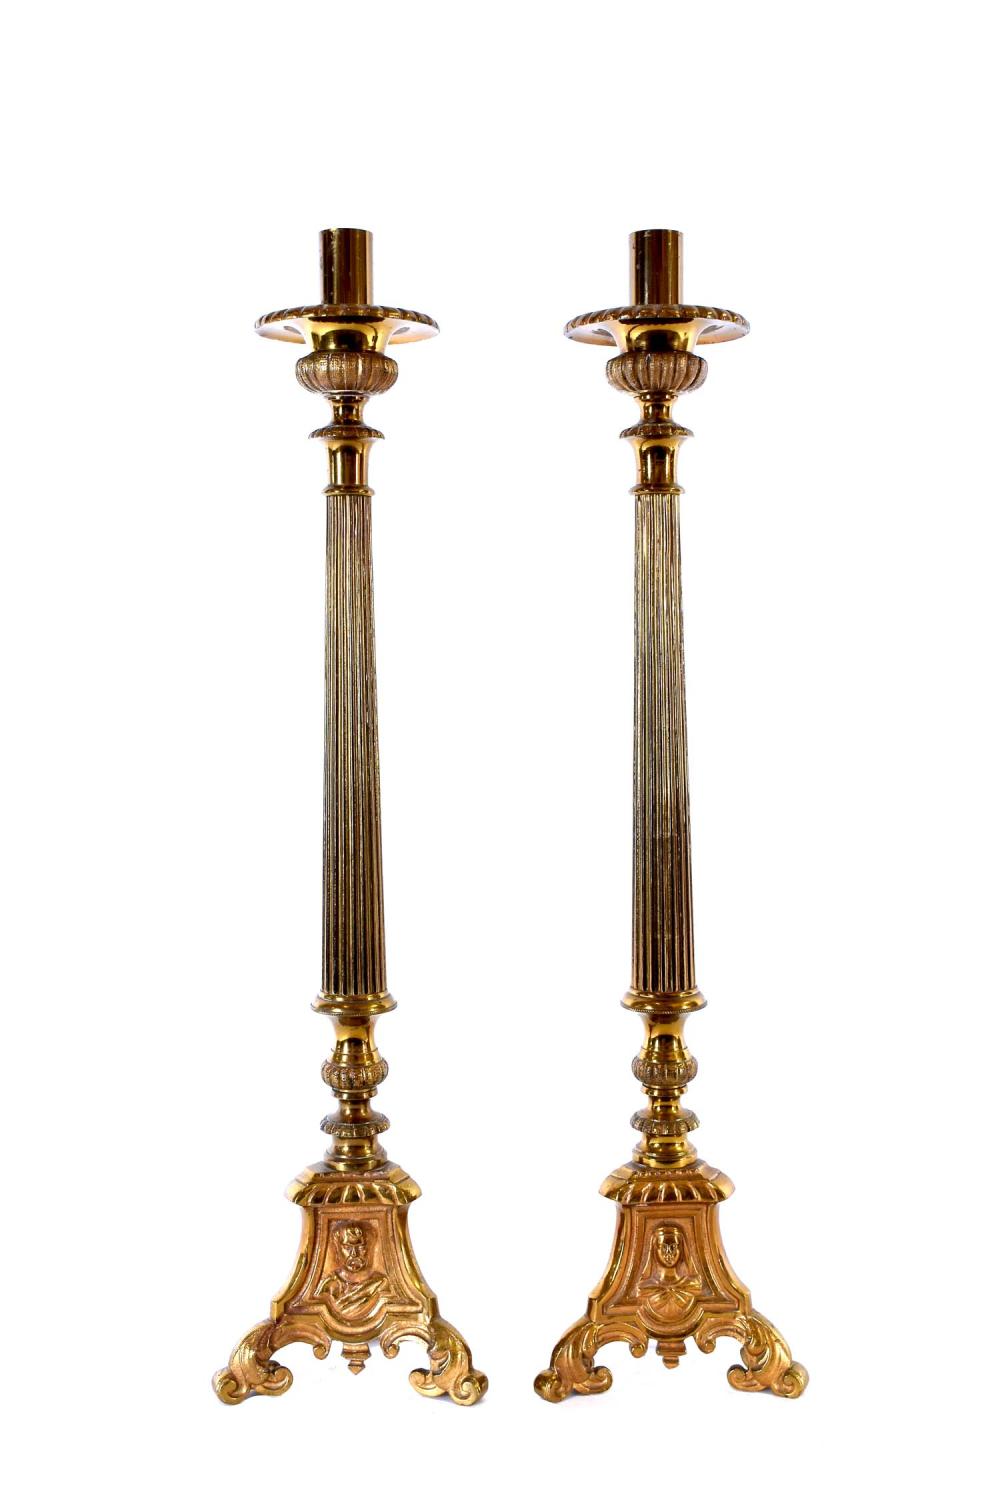 PAIR OF CONTINENTAL FLUTED BRONZE